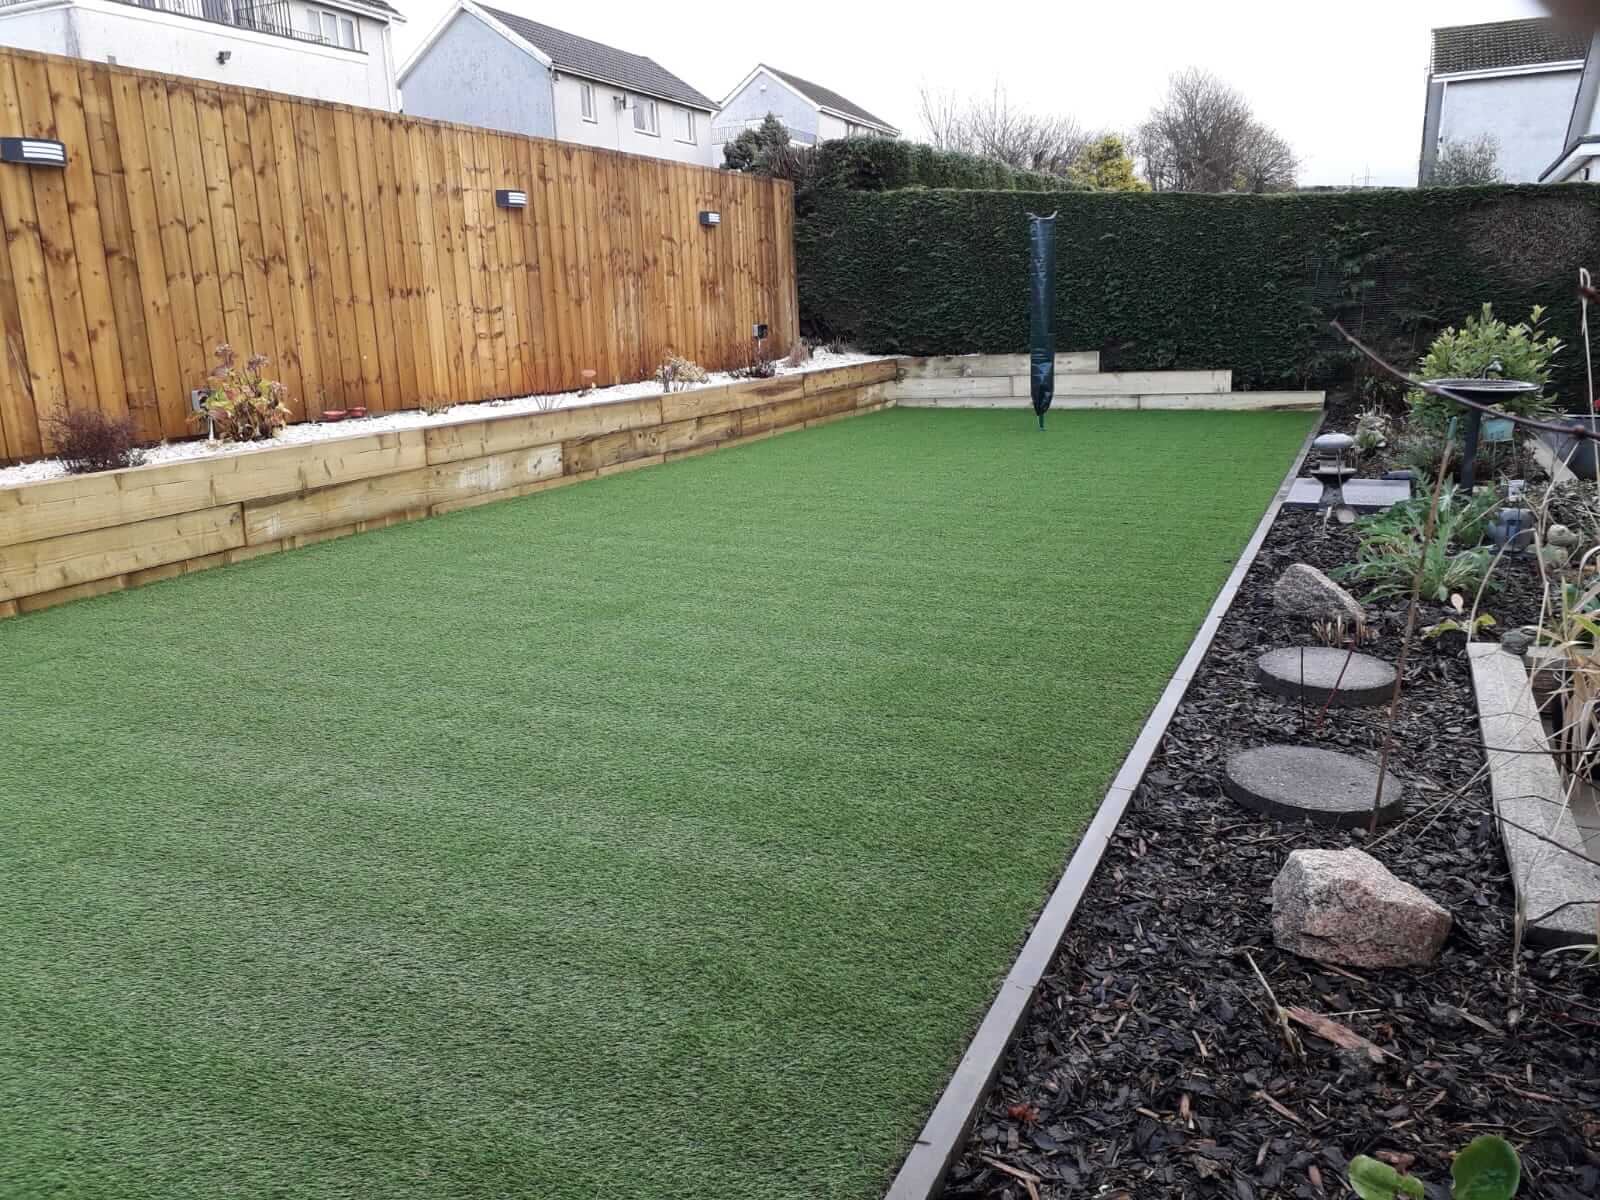 Garden project, laid AstroTurf, sleepers and paving